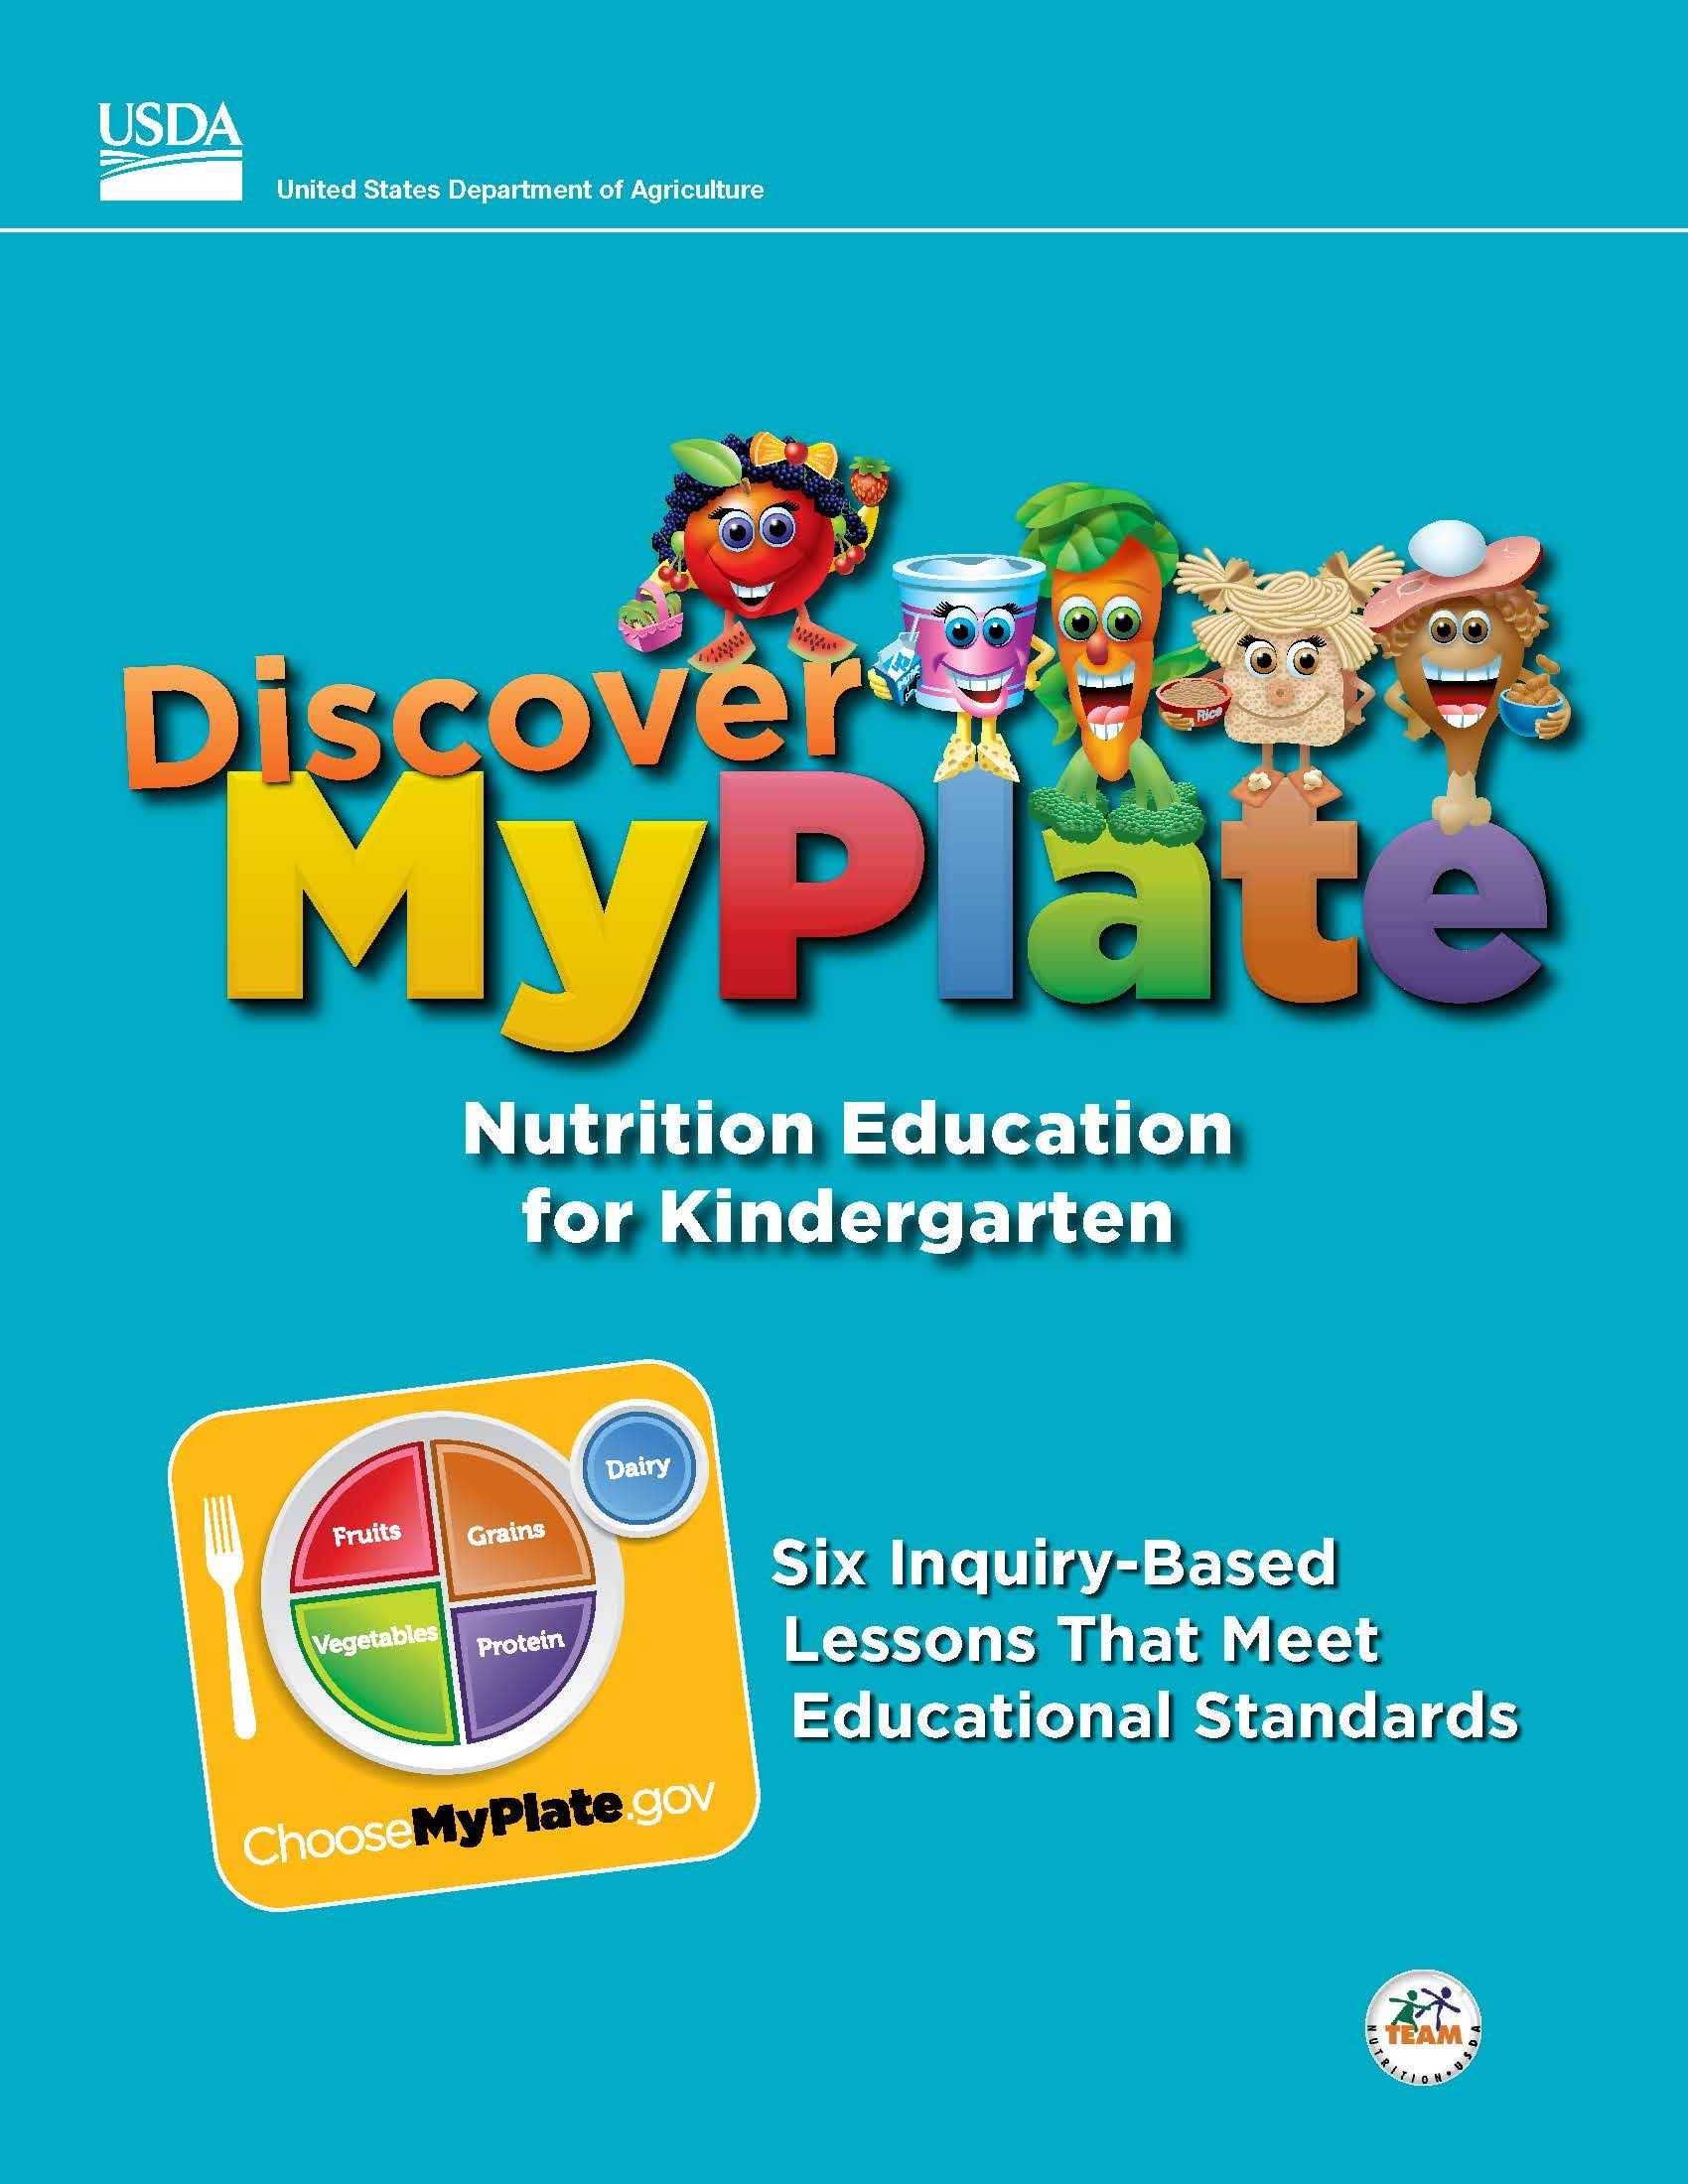 Free Nutrition Worksheets or Free Discover Myplate Nutrition Education Lessons for